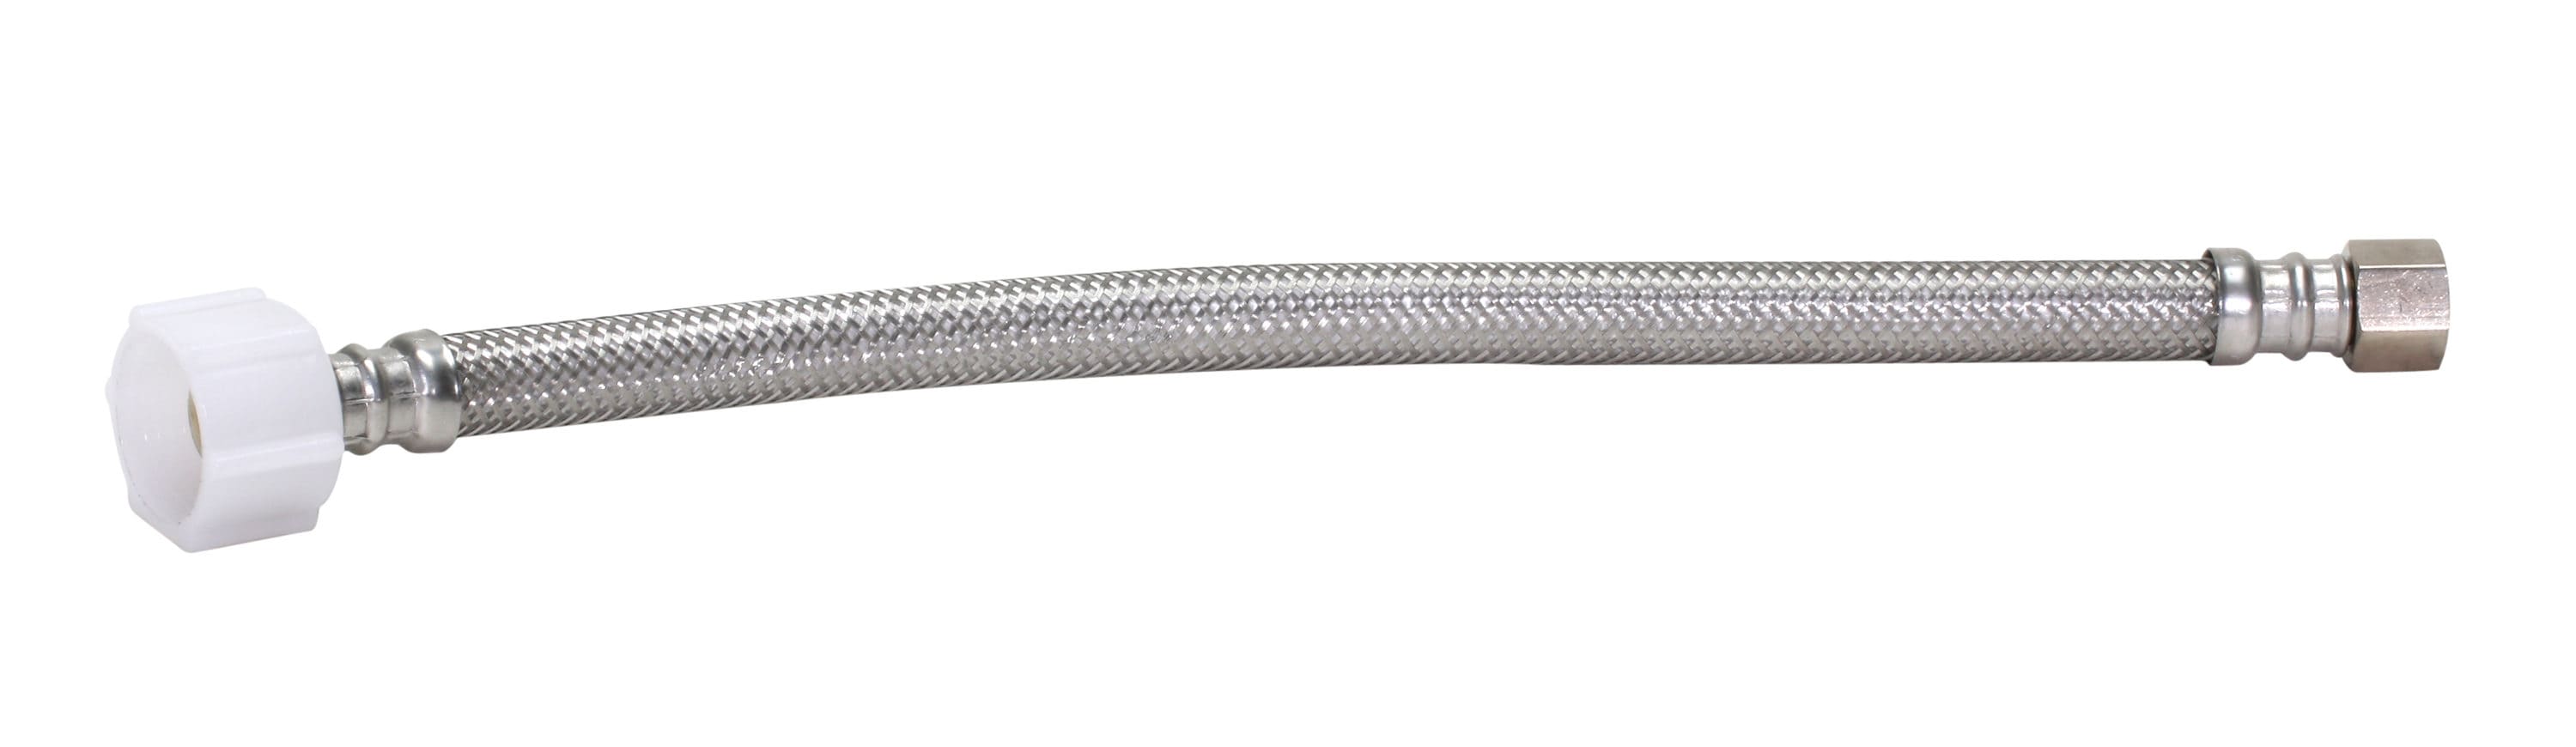 Braided Stainless Steel Hose for Gas Appliances Nut-Elbow 1/2-1/2